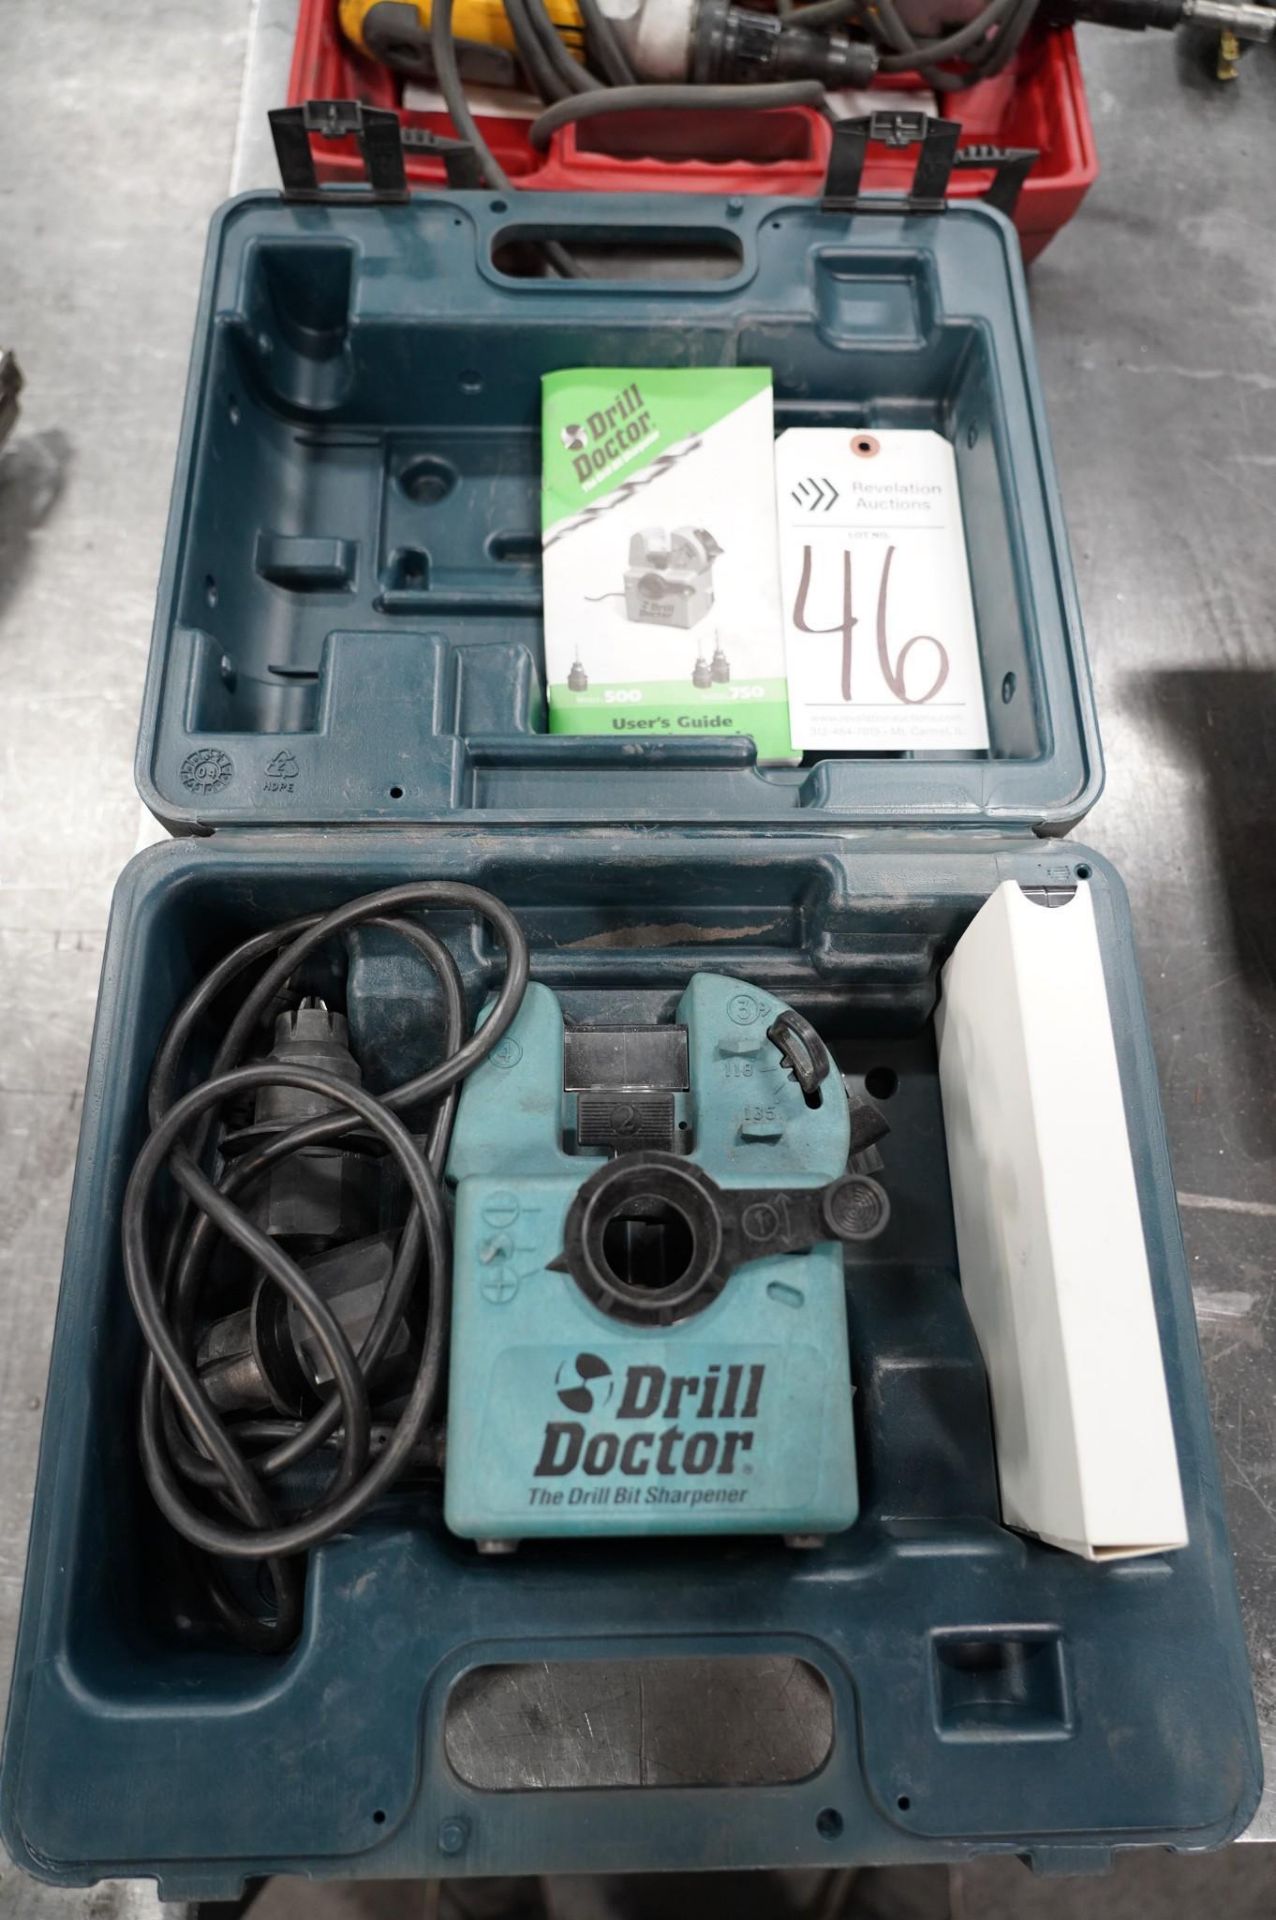 DRILL DOCTOR 750 ELECTRIC DRILL SHARPENER